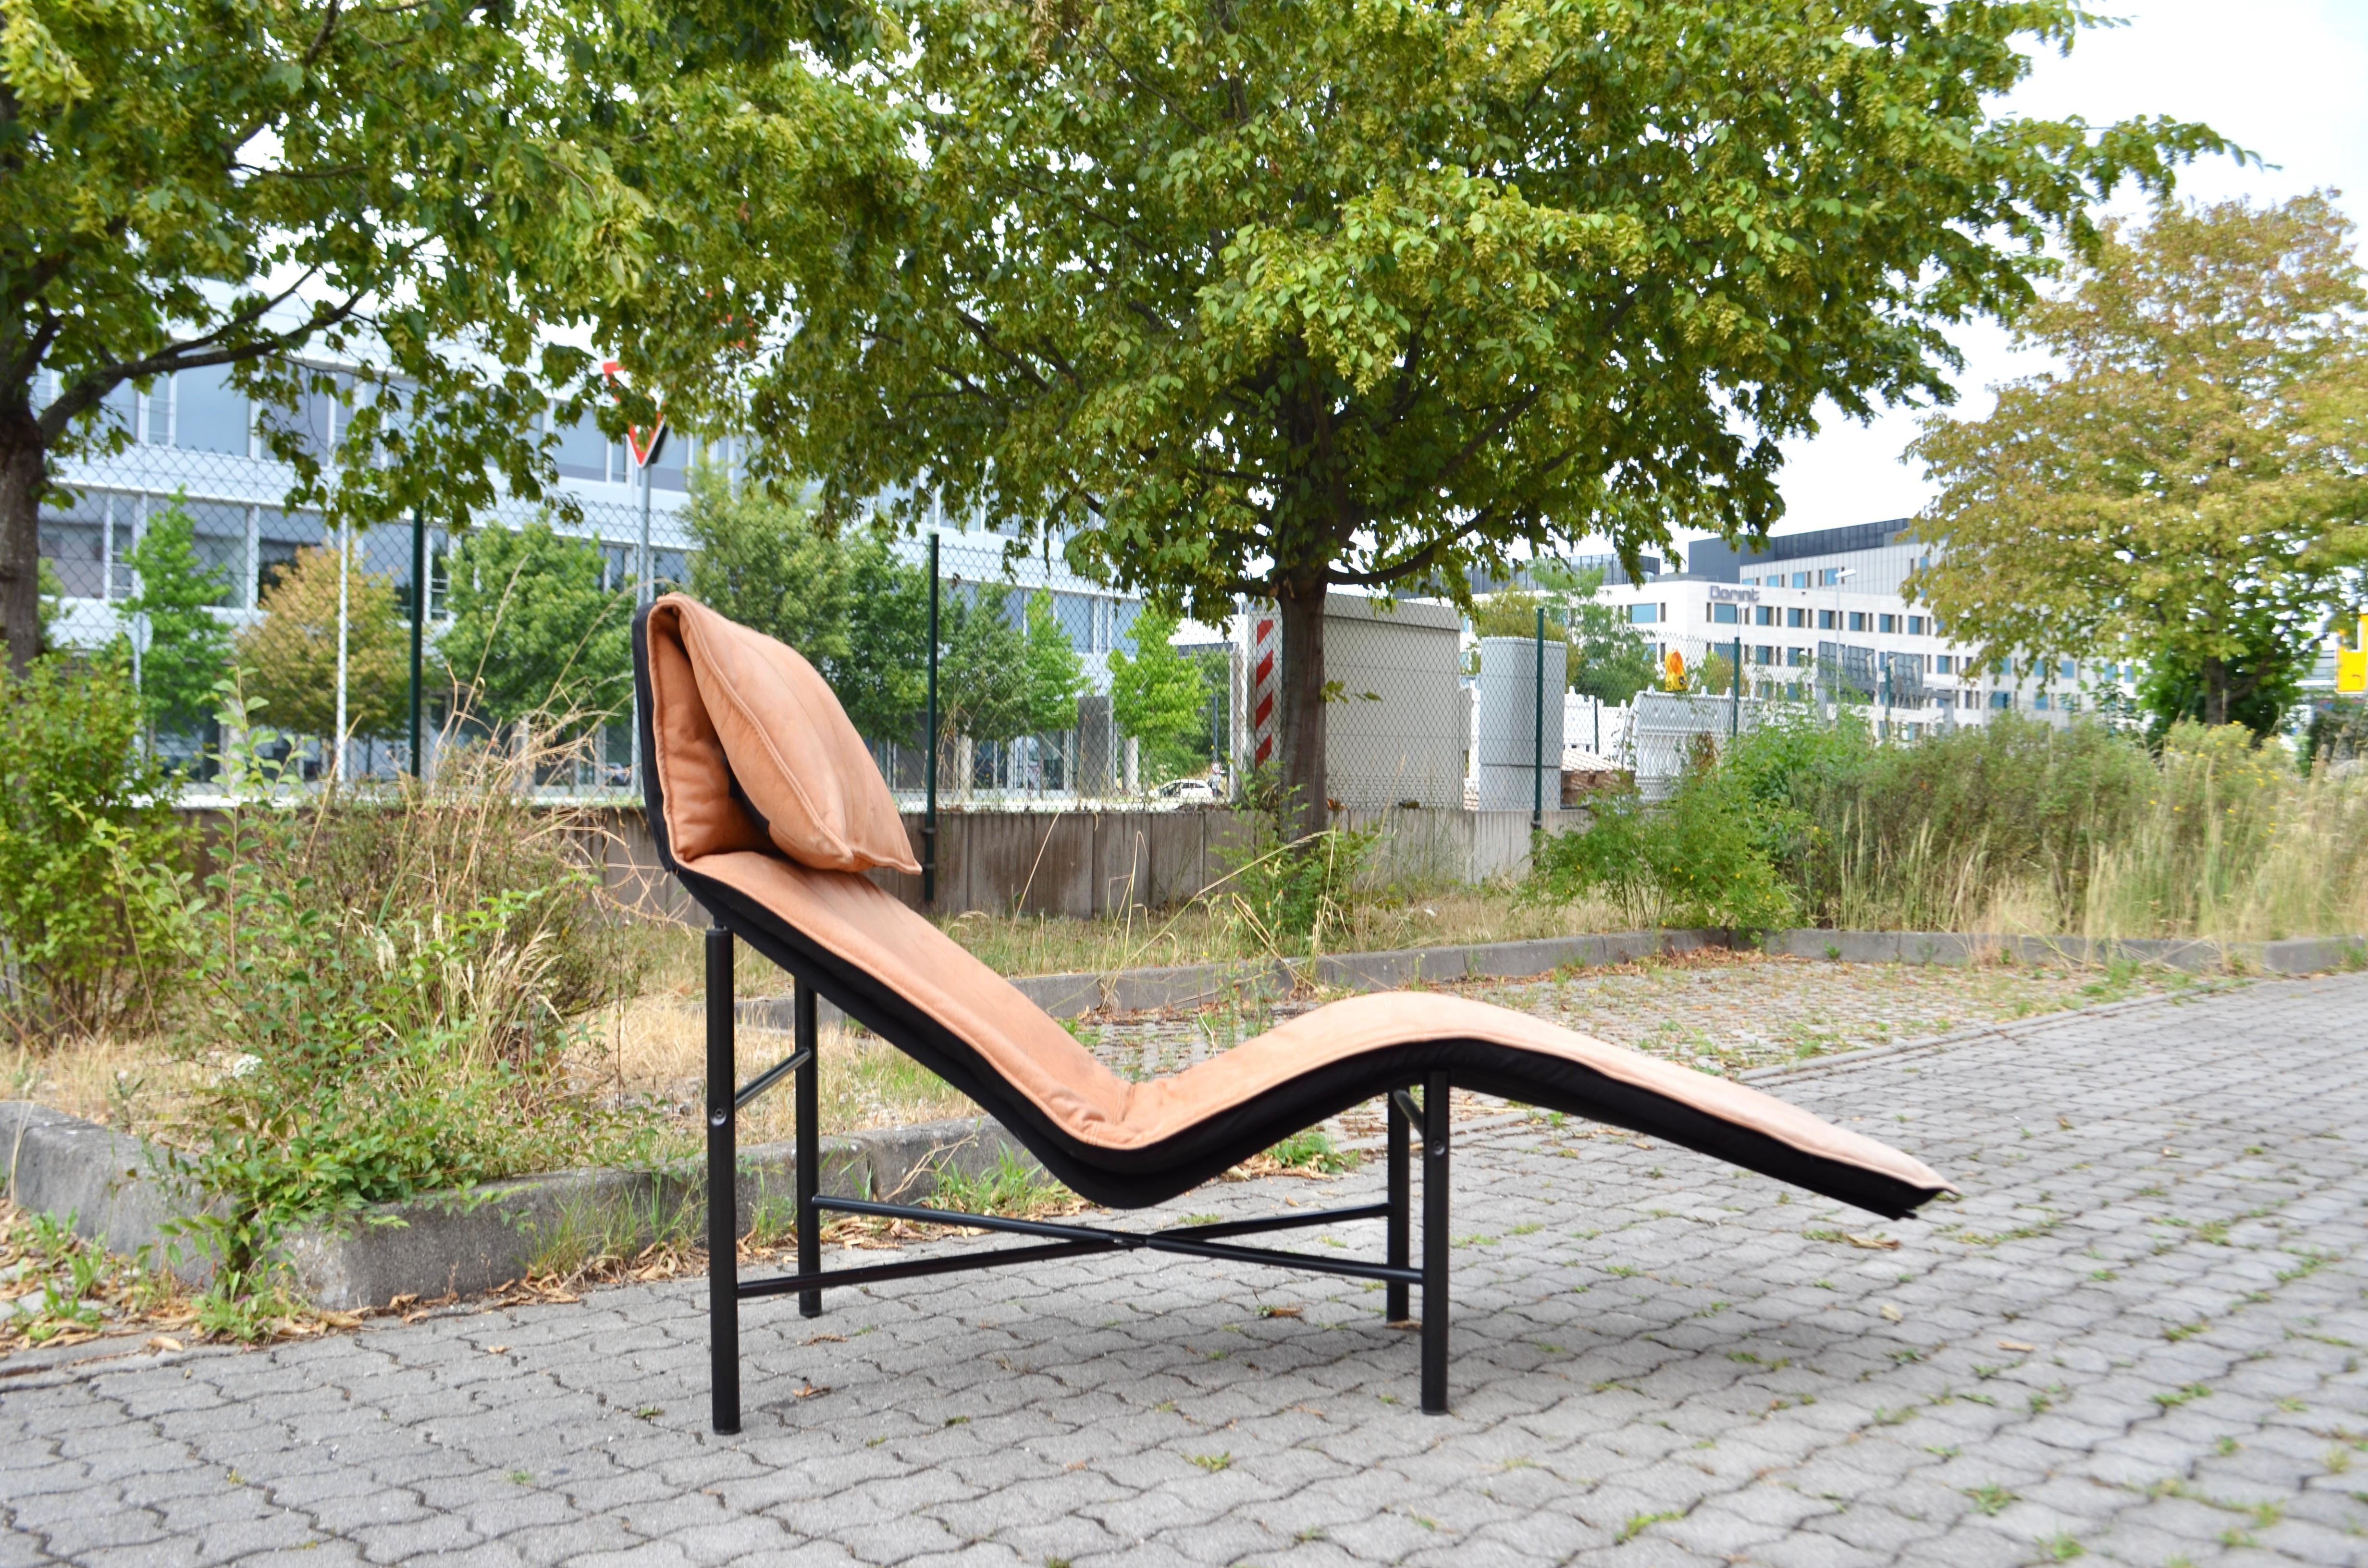 Ikea Modell Skye design by Tord Bjorklund in the 80ties.
Comfortable Chaiselongue.A classic design from Tord Bjorklund.
Cognac thick  leather and black tubular steel.
Great quality.
